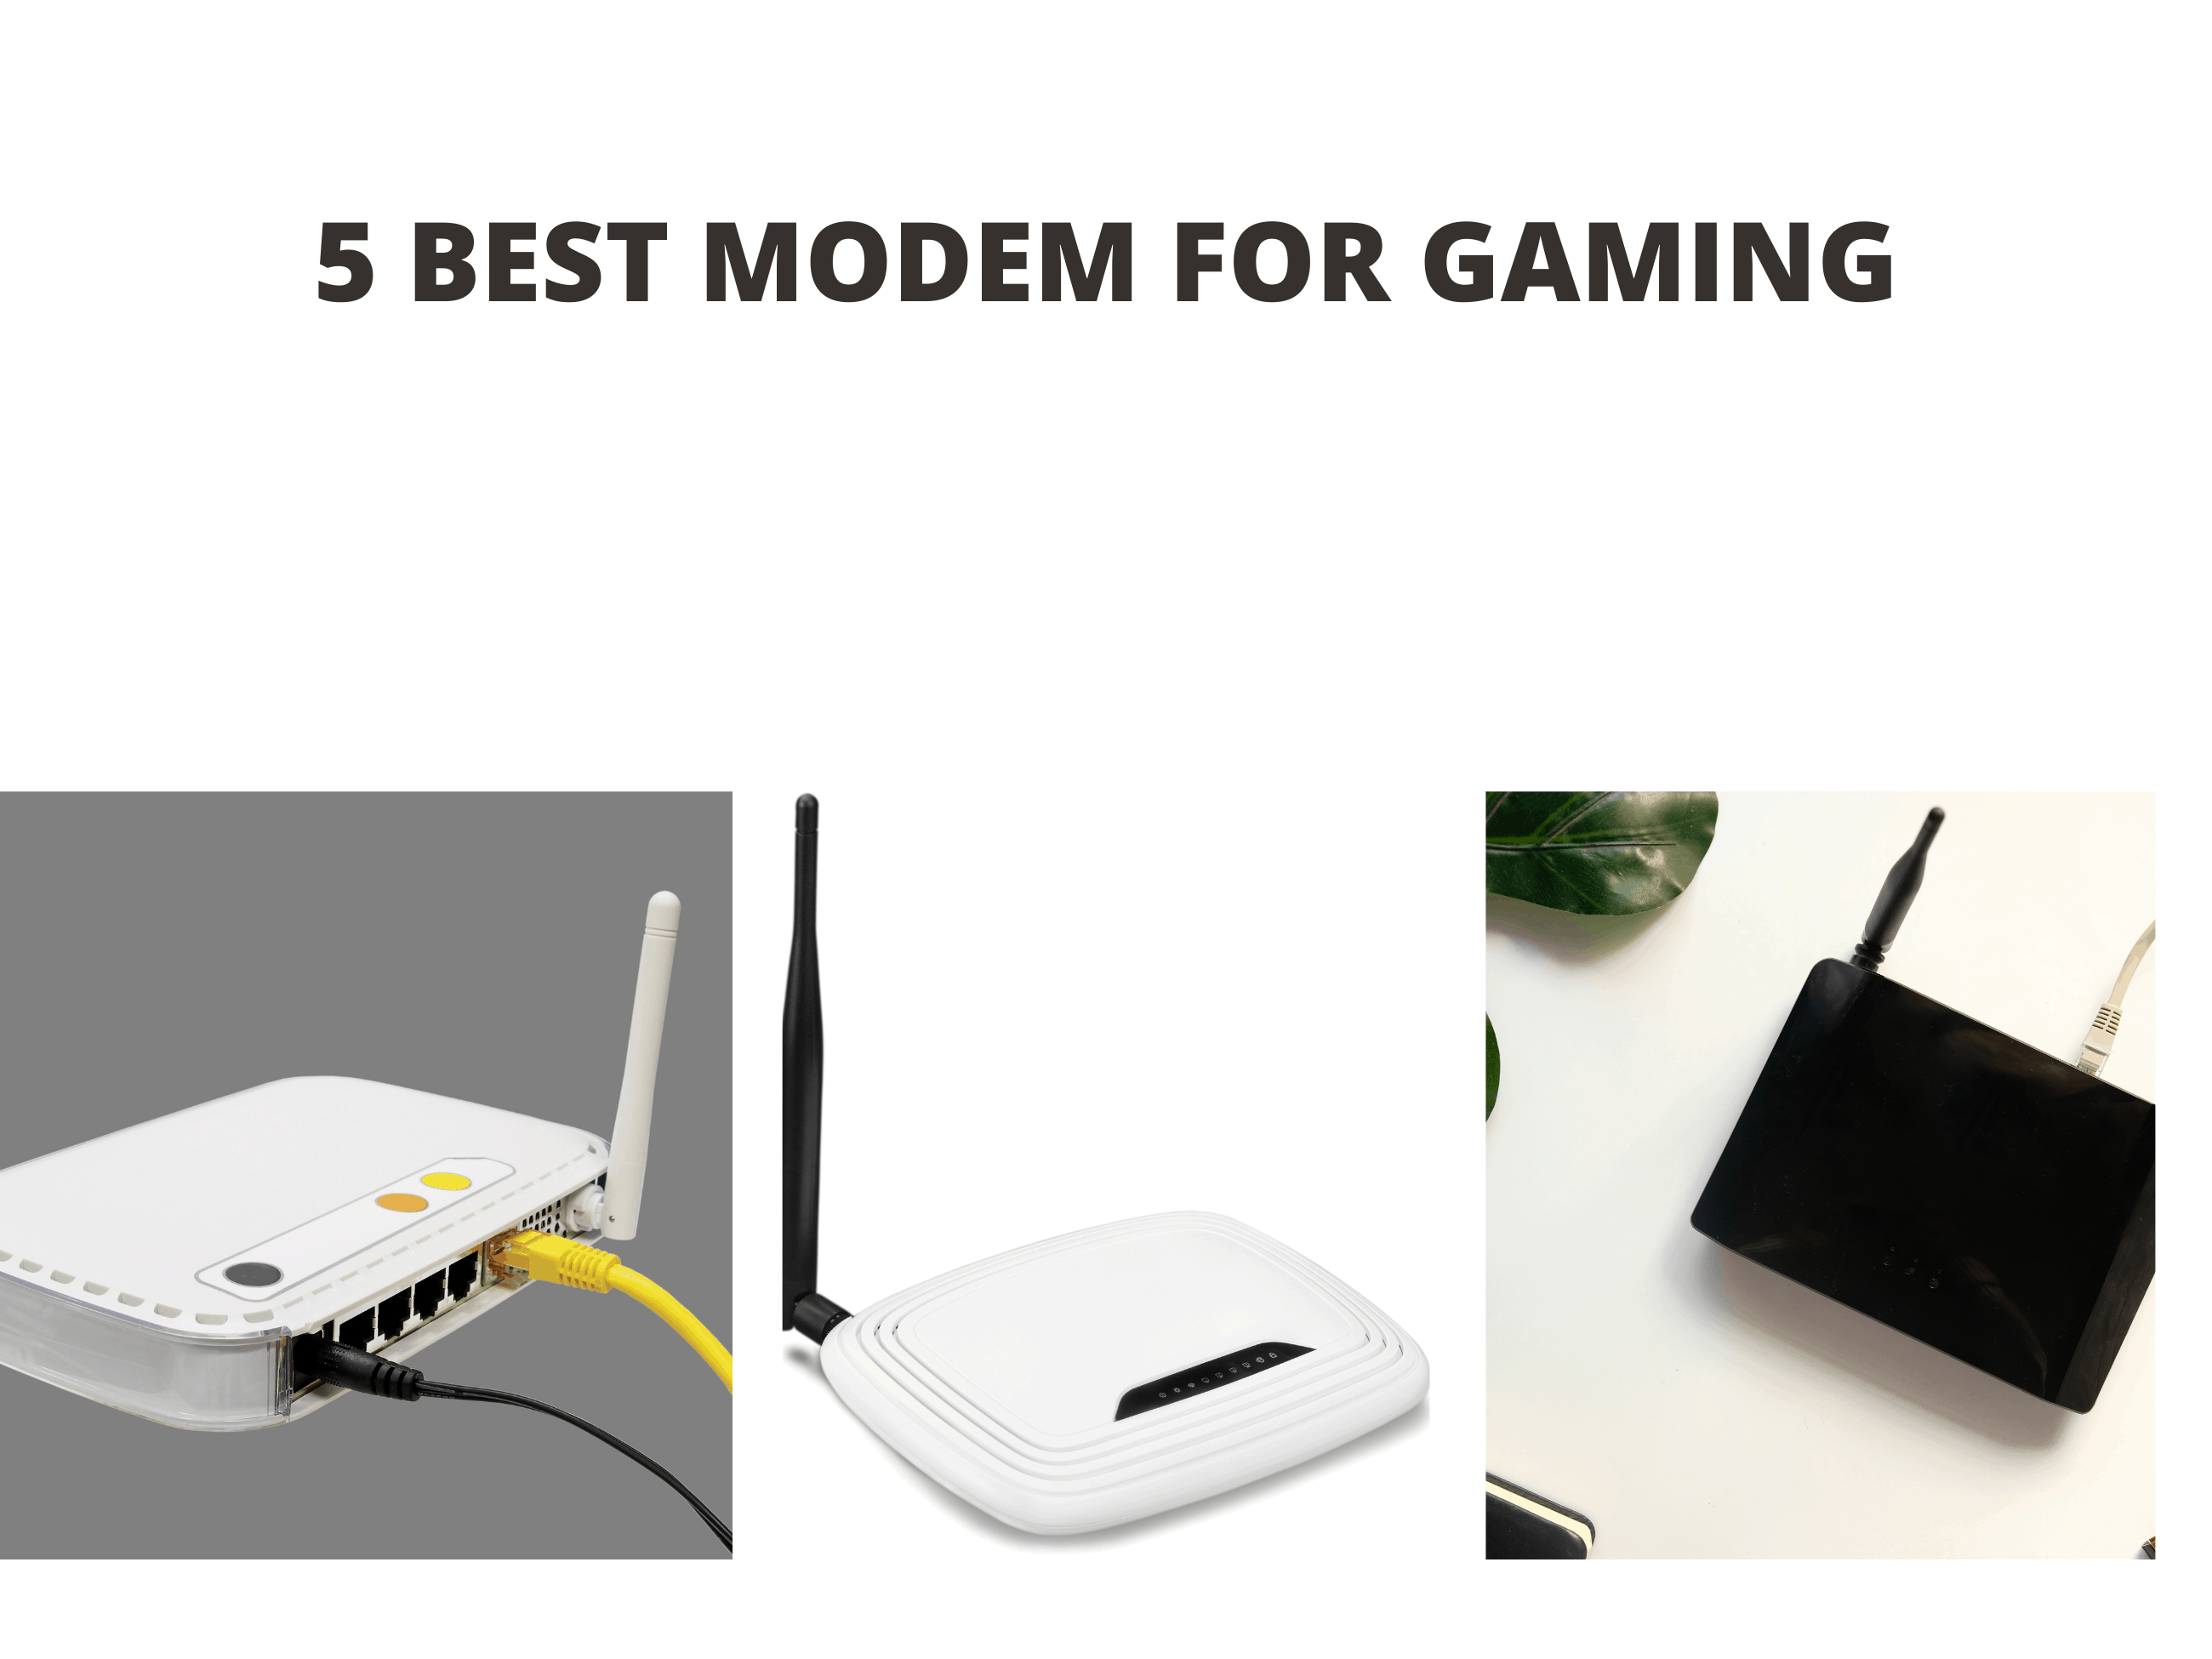 5 Best Modem for Gaming (2022 Reviews)